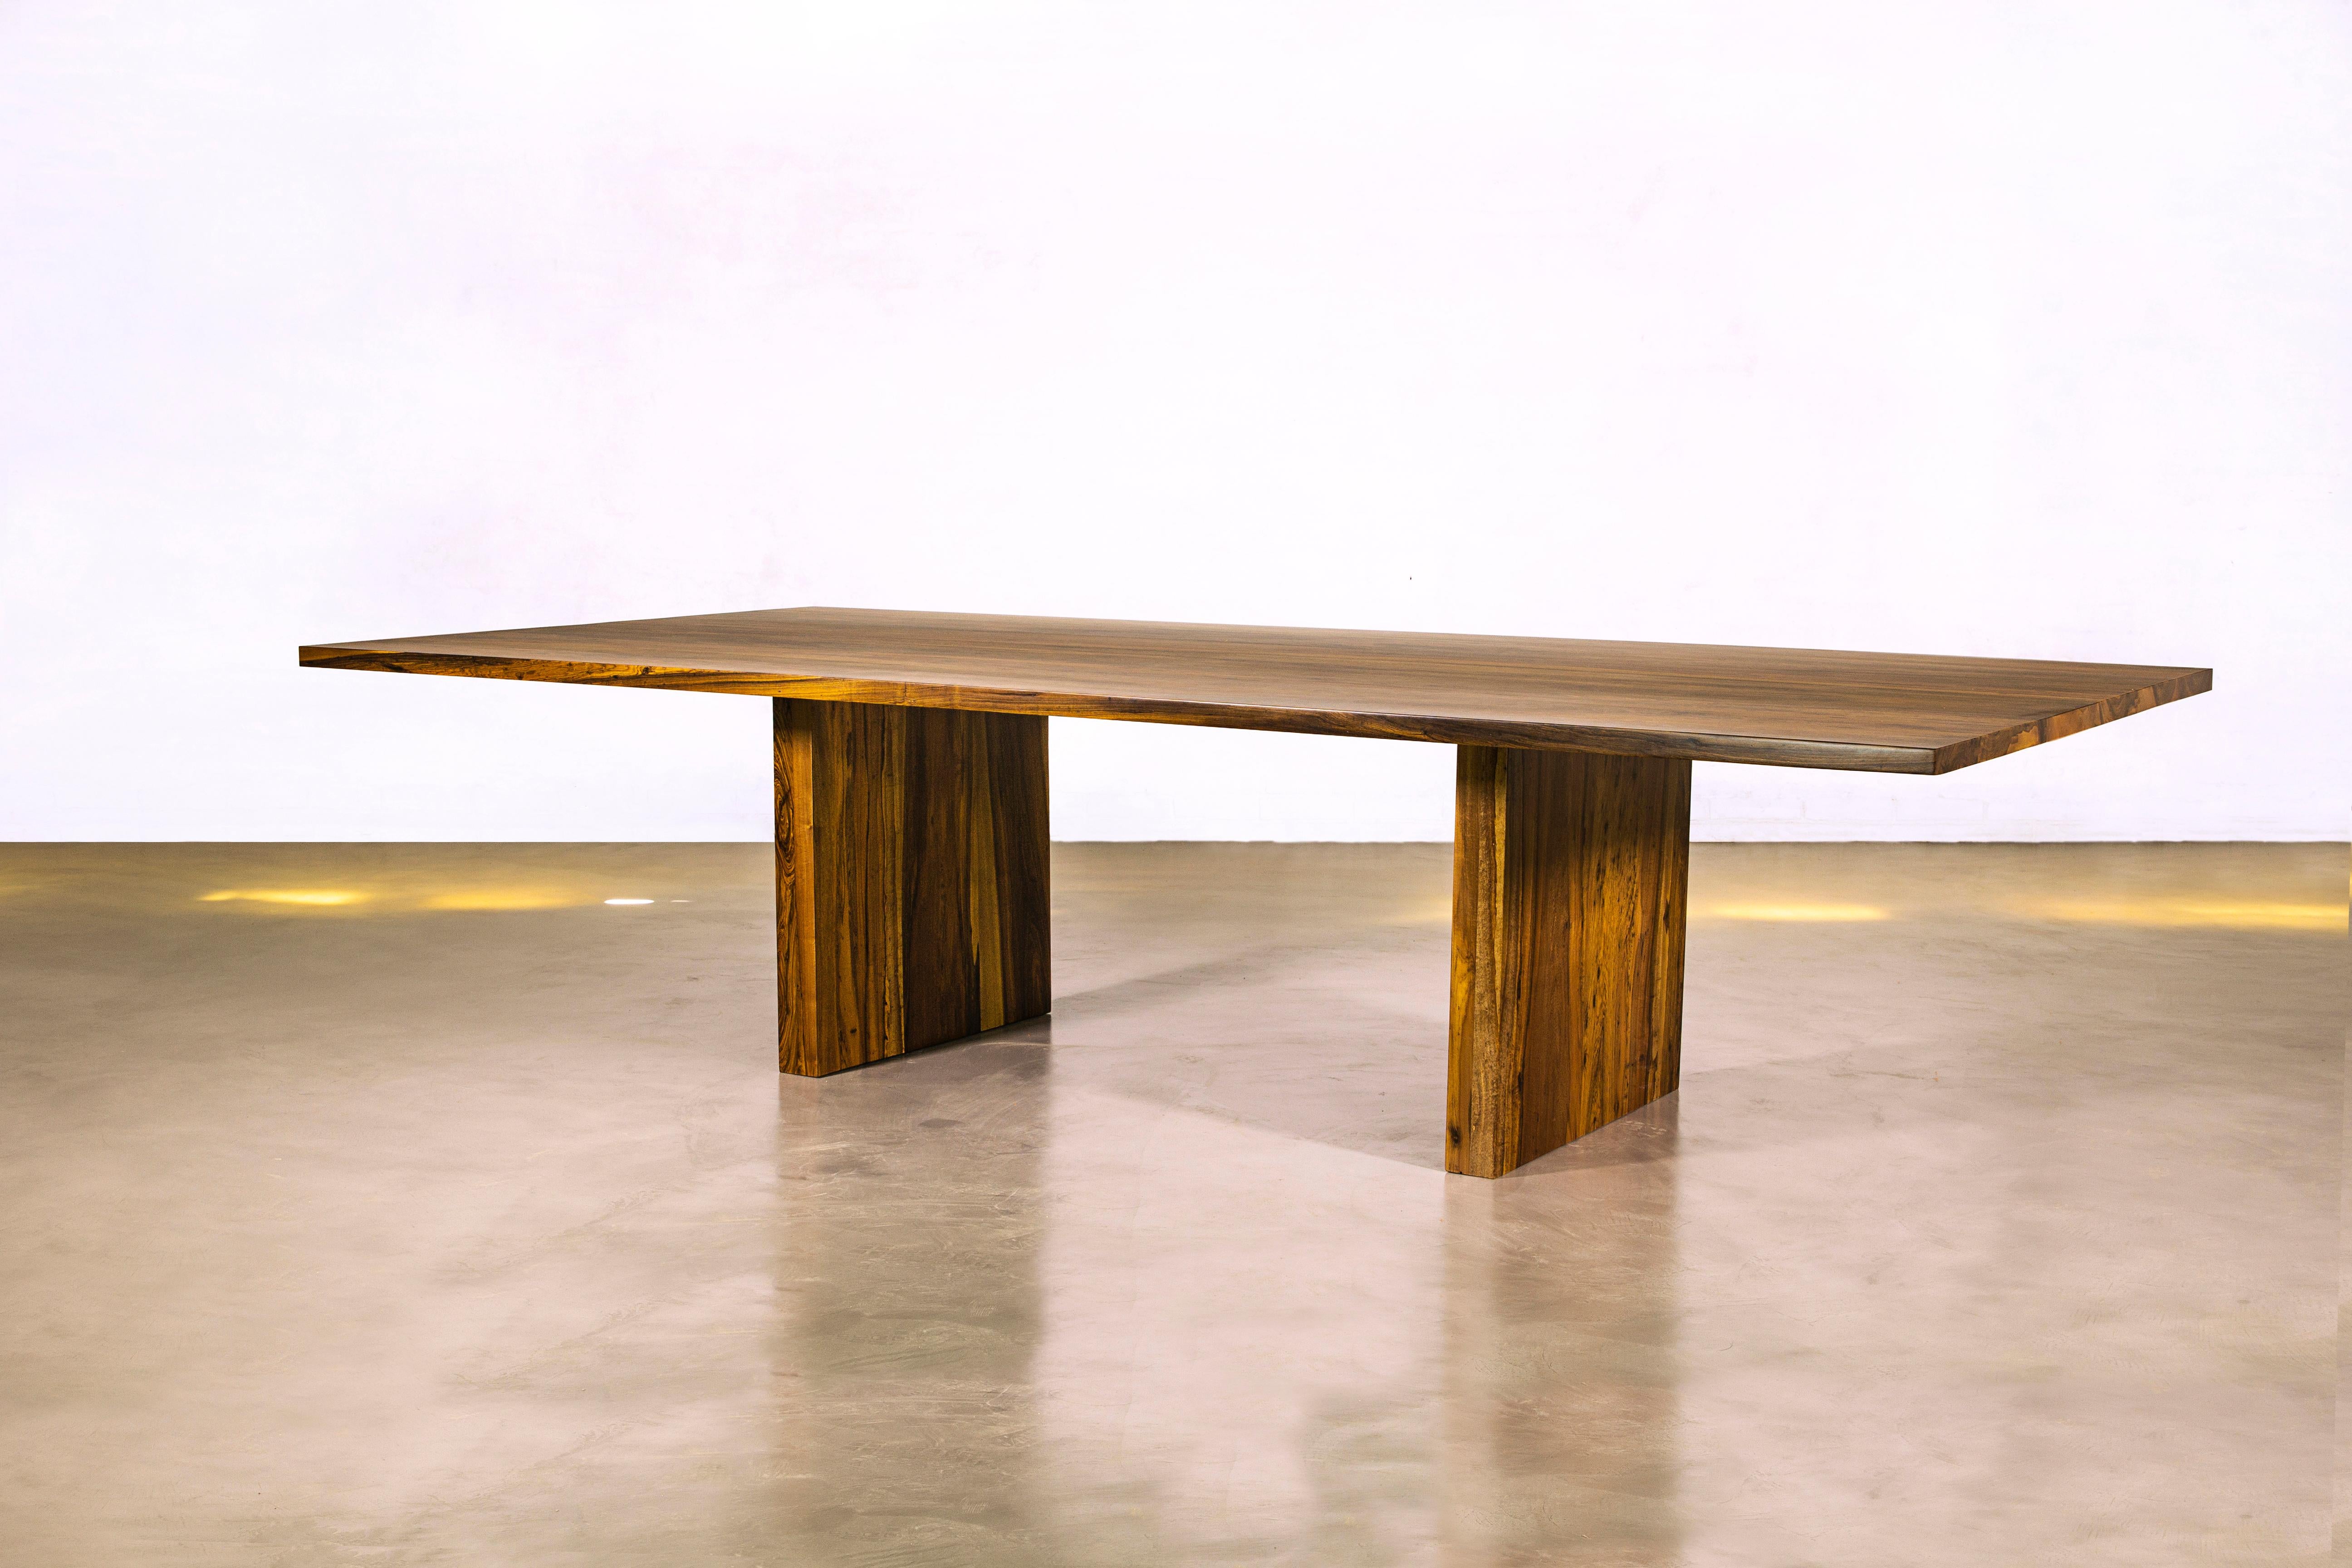 The Andre Table is shown here in natural Argentine Rosewood, with two solid wood pedestals. This piece comes in any of our standard wood species and finishes, and in any size. Made to order, but some sizes may be in stock and ready for immediate